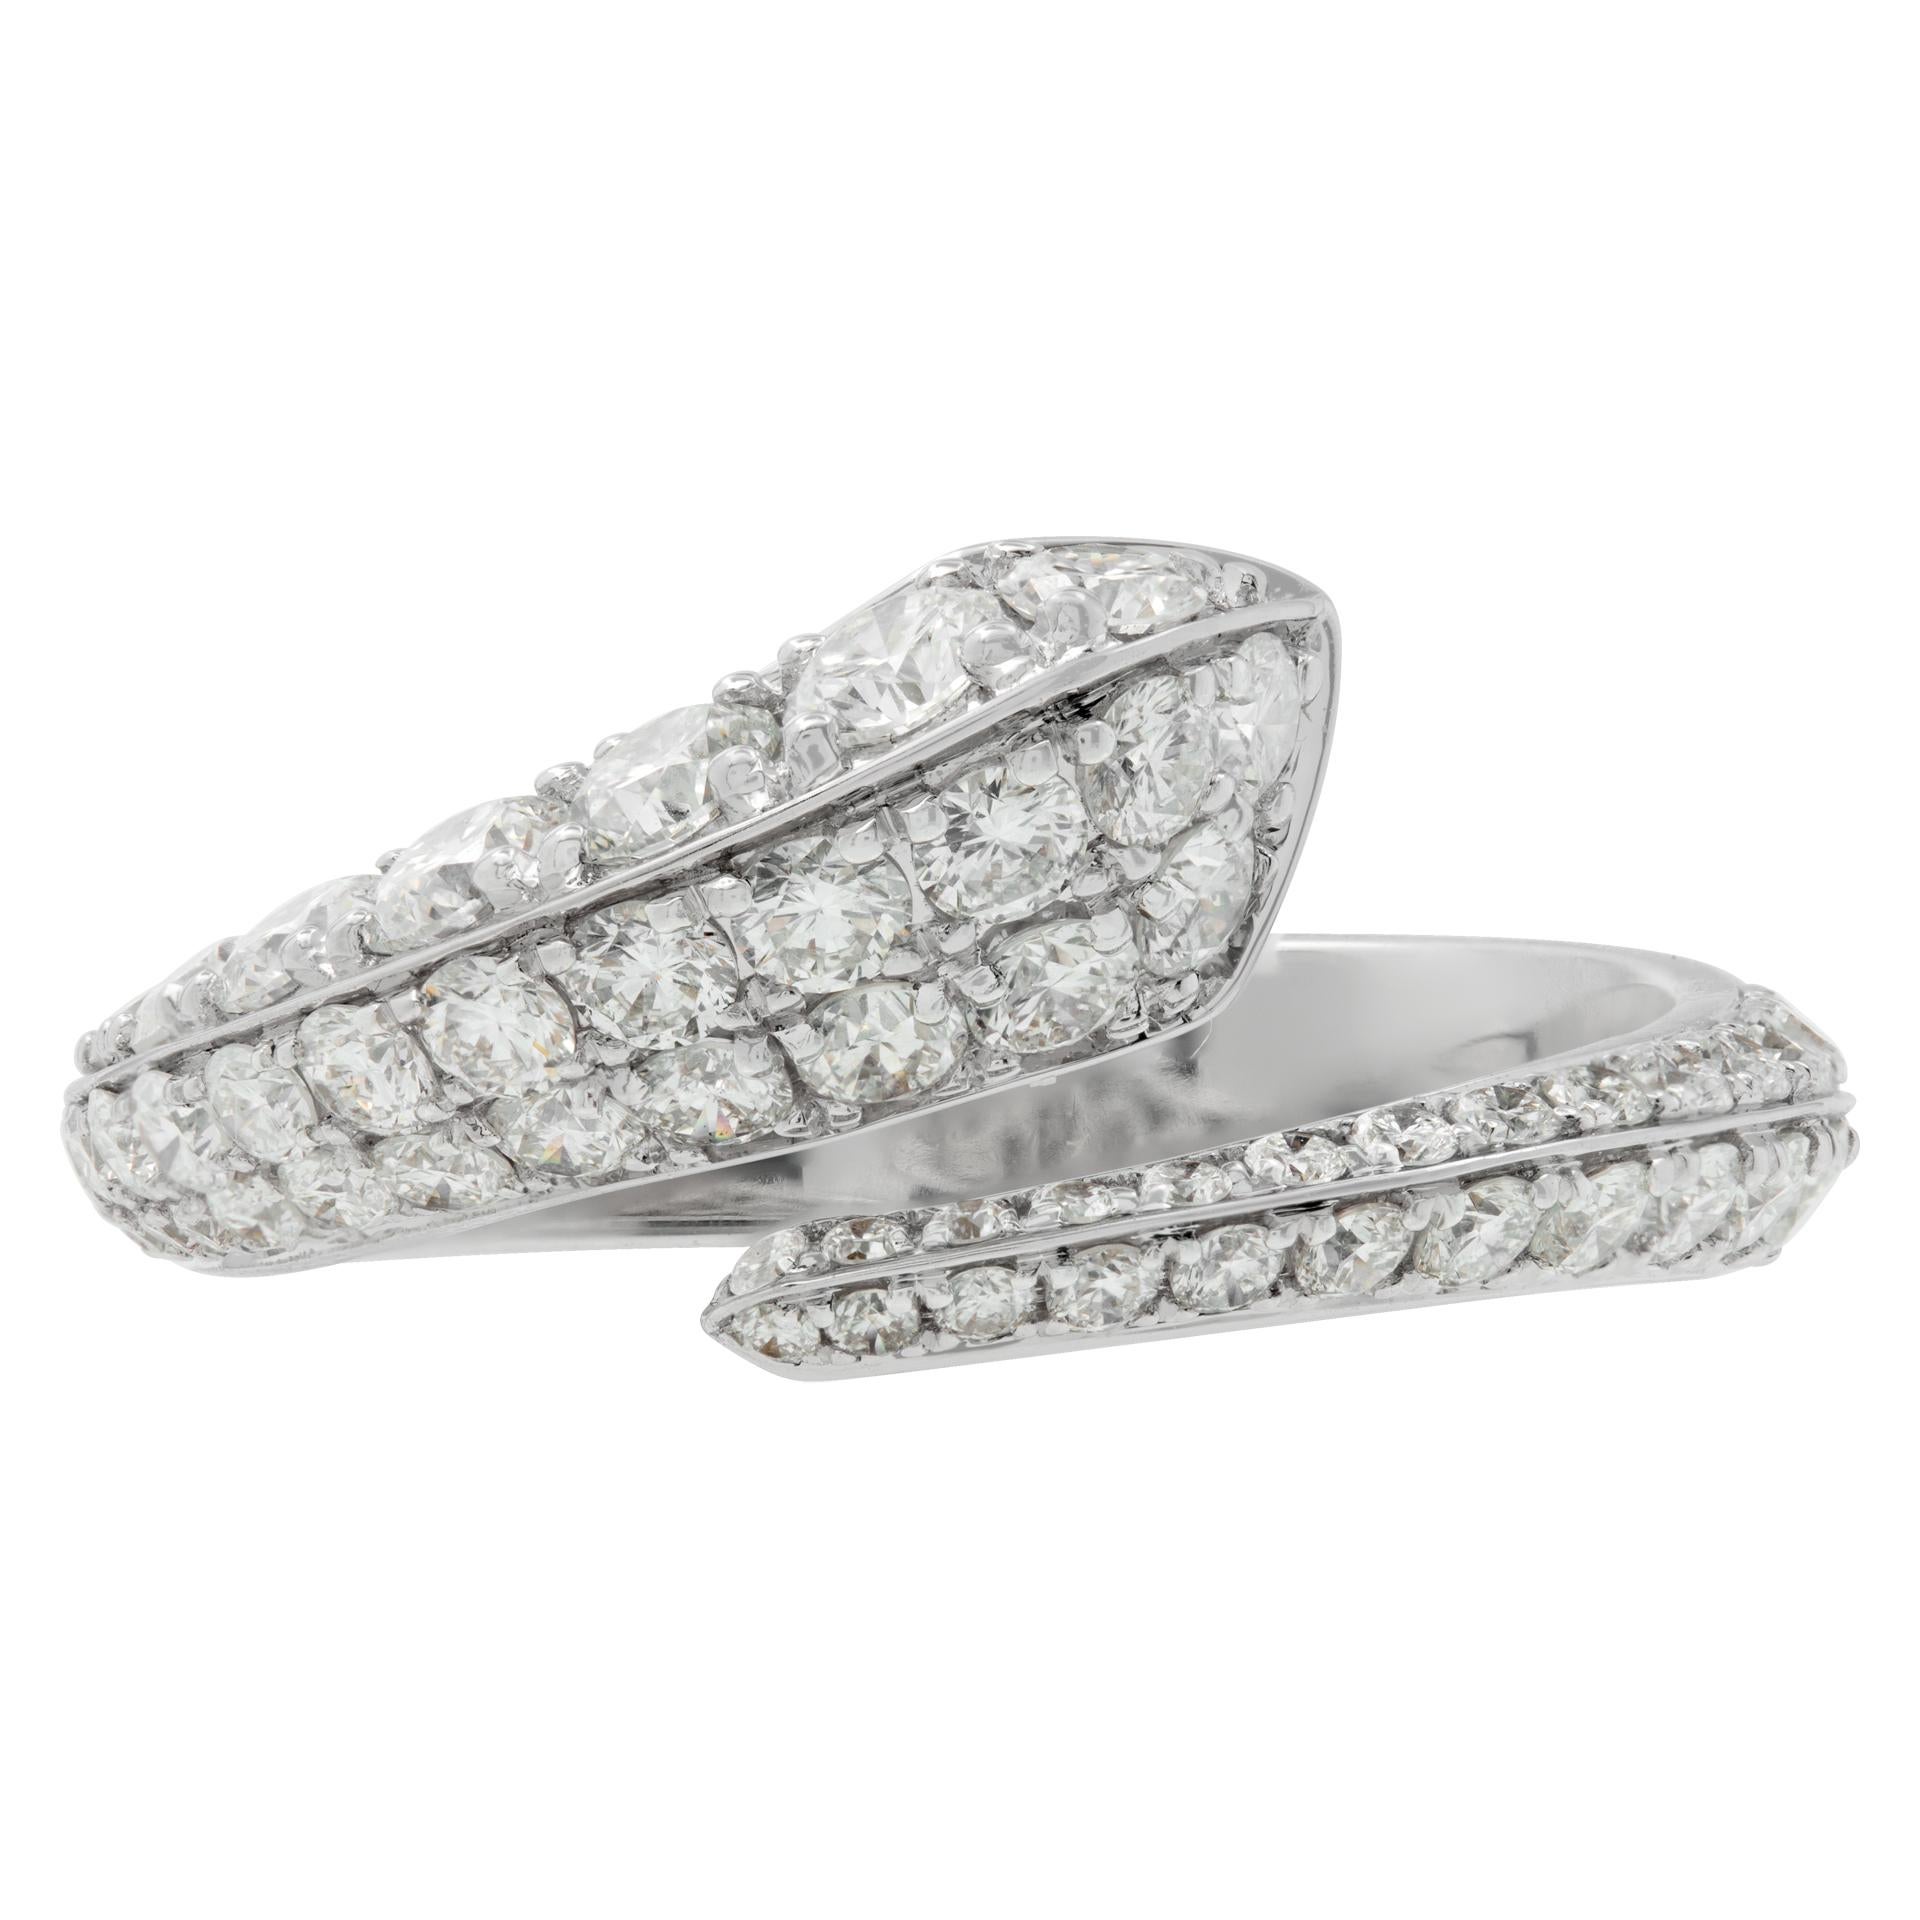 Diamond crossover ring in 18k white gold with 1.56 carats in round brilliant cut diamonds (G-H Color, VS Clarity). Size 6.5.This Diamond ring is currently size 6.5 and some items can be sized up or down, please ask! It weighs 4.53 gramms and is 18k